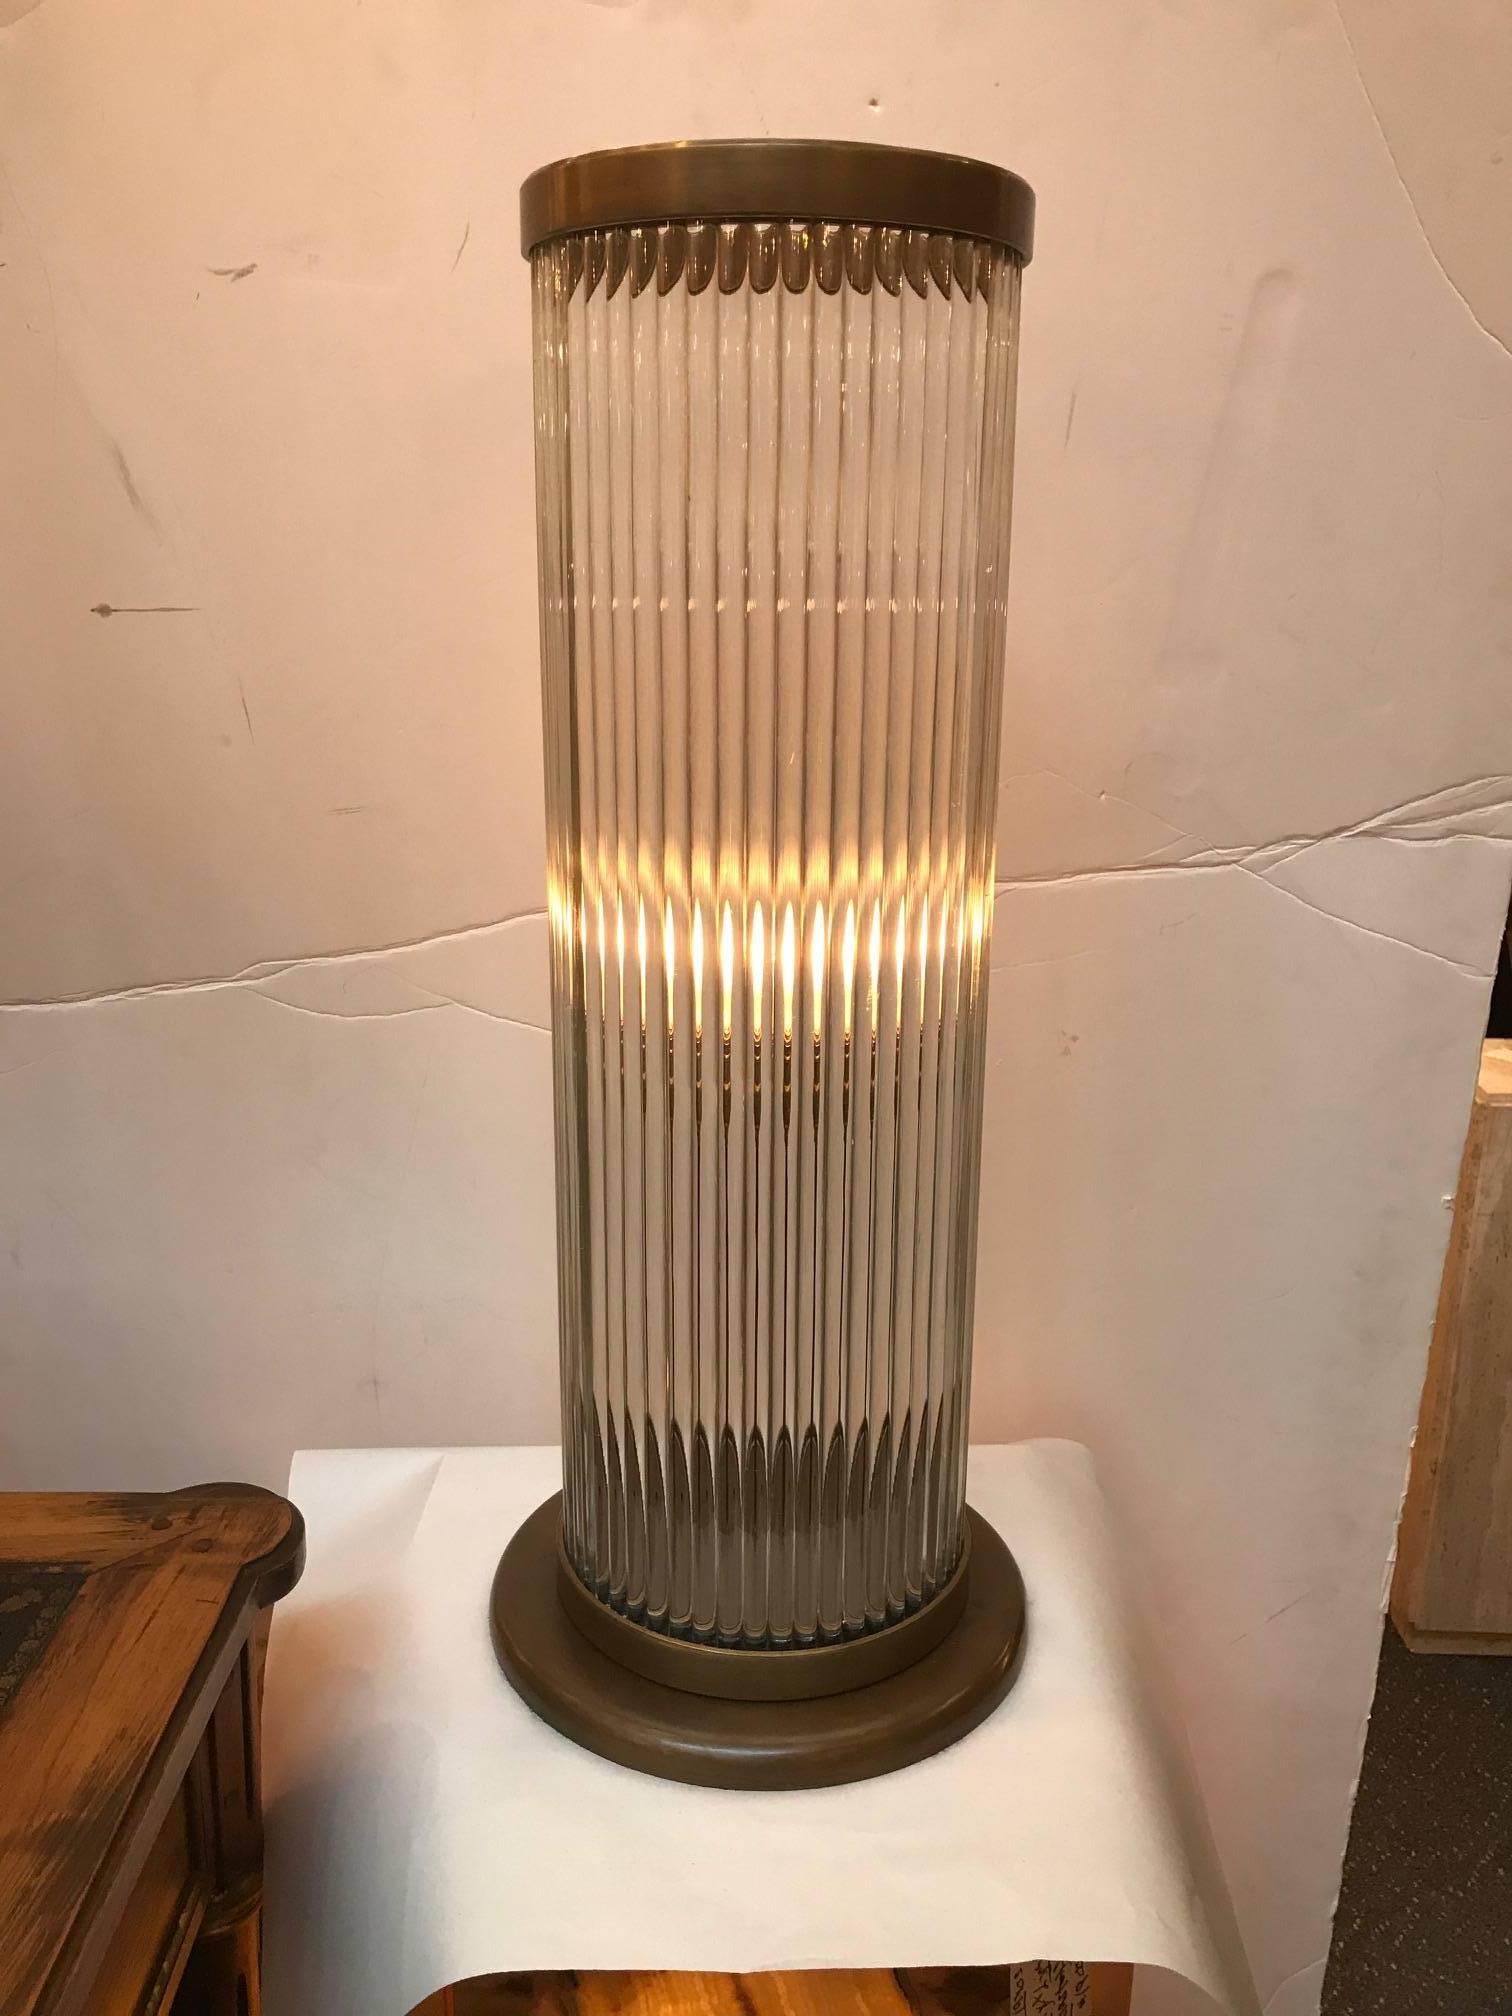 1970s cylindrical glass lamp with bronze mounts. The tall glass body with ribbed exterior and 10.5 inch bronze base. The top has a diameter of 8.25 inches. Takes a standard bulb with low, medium and high setting. Deco inspired design.